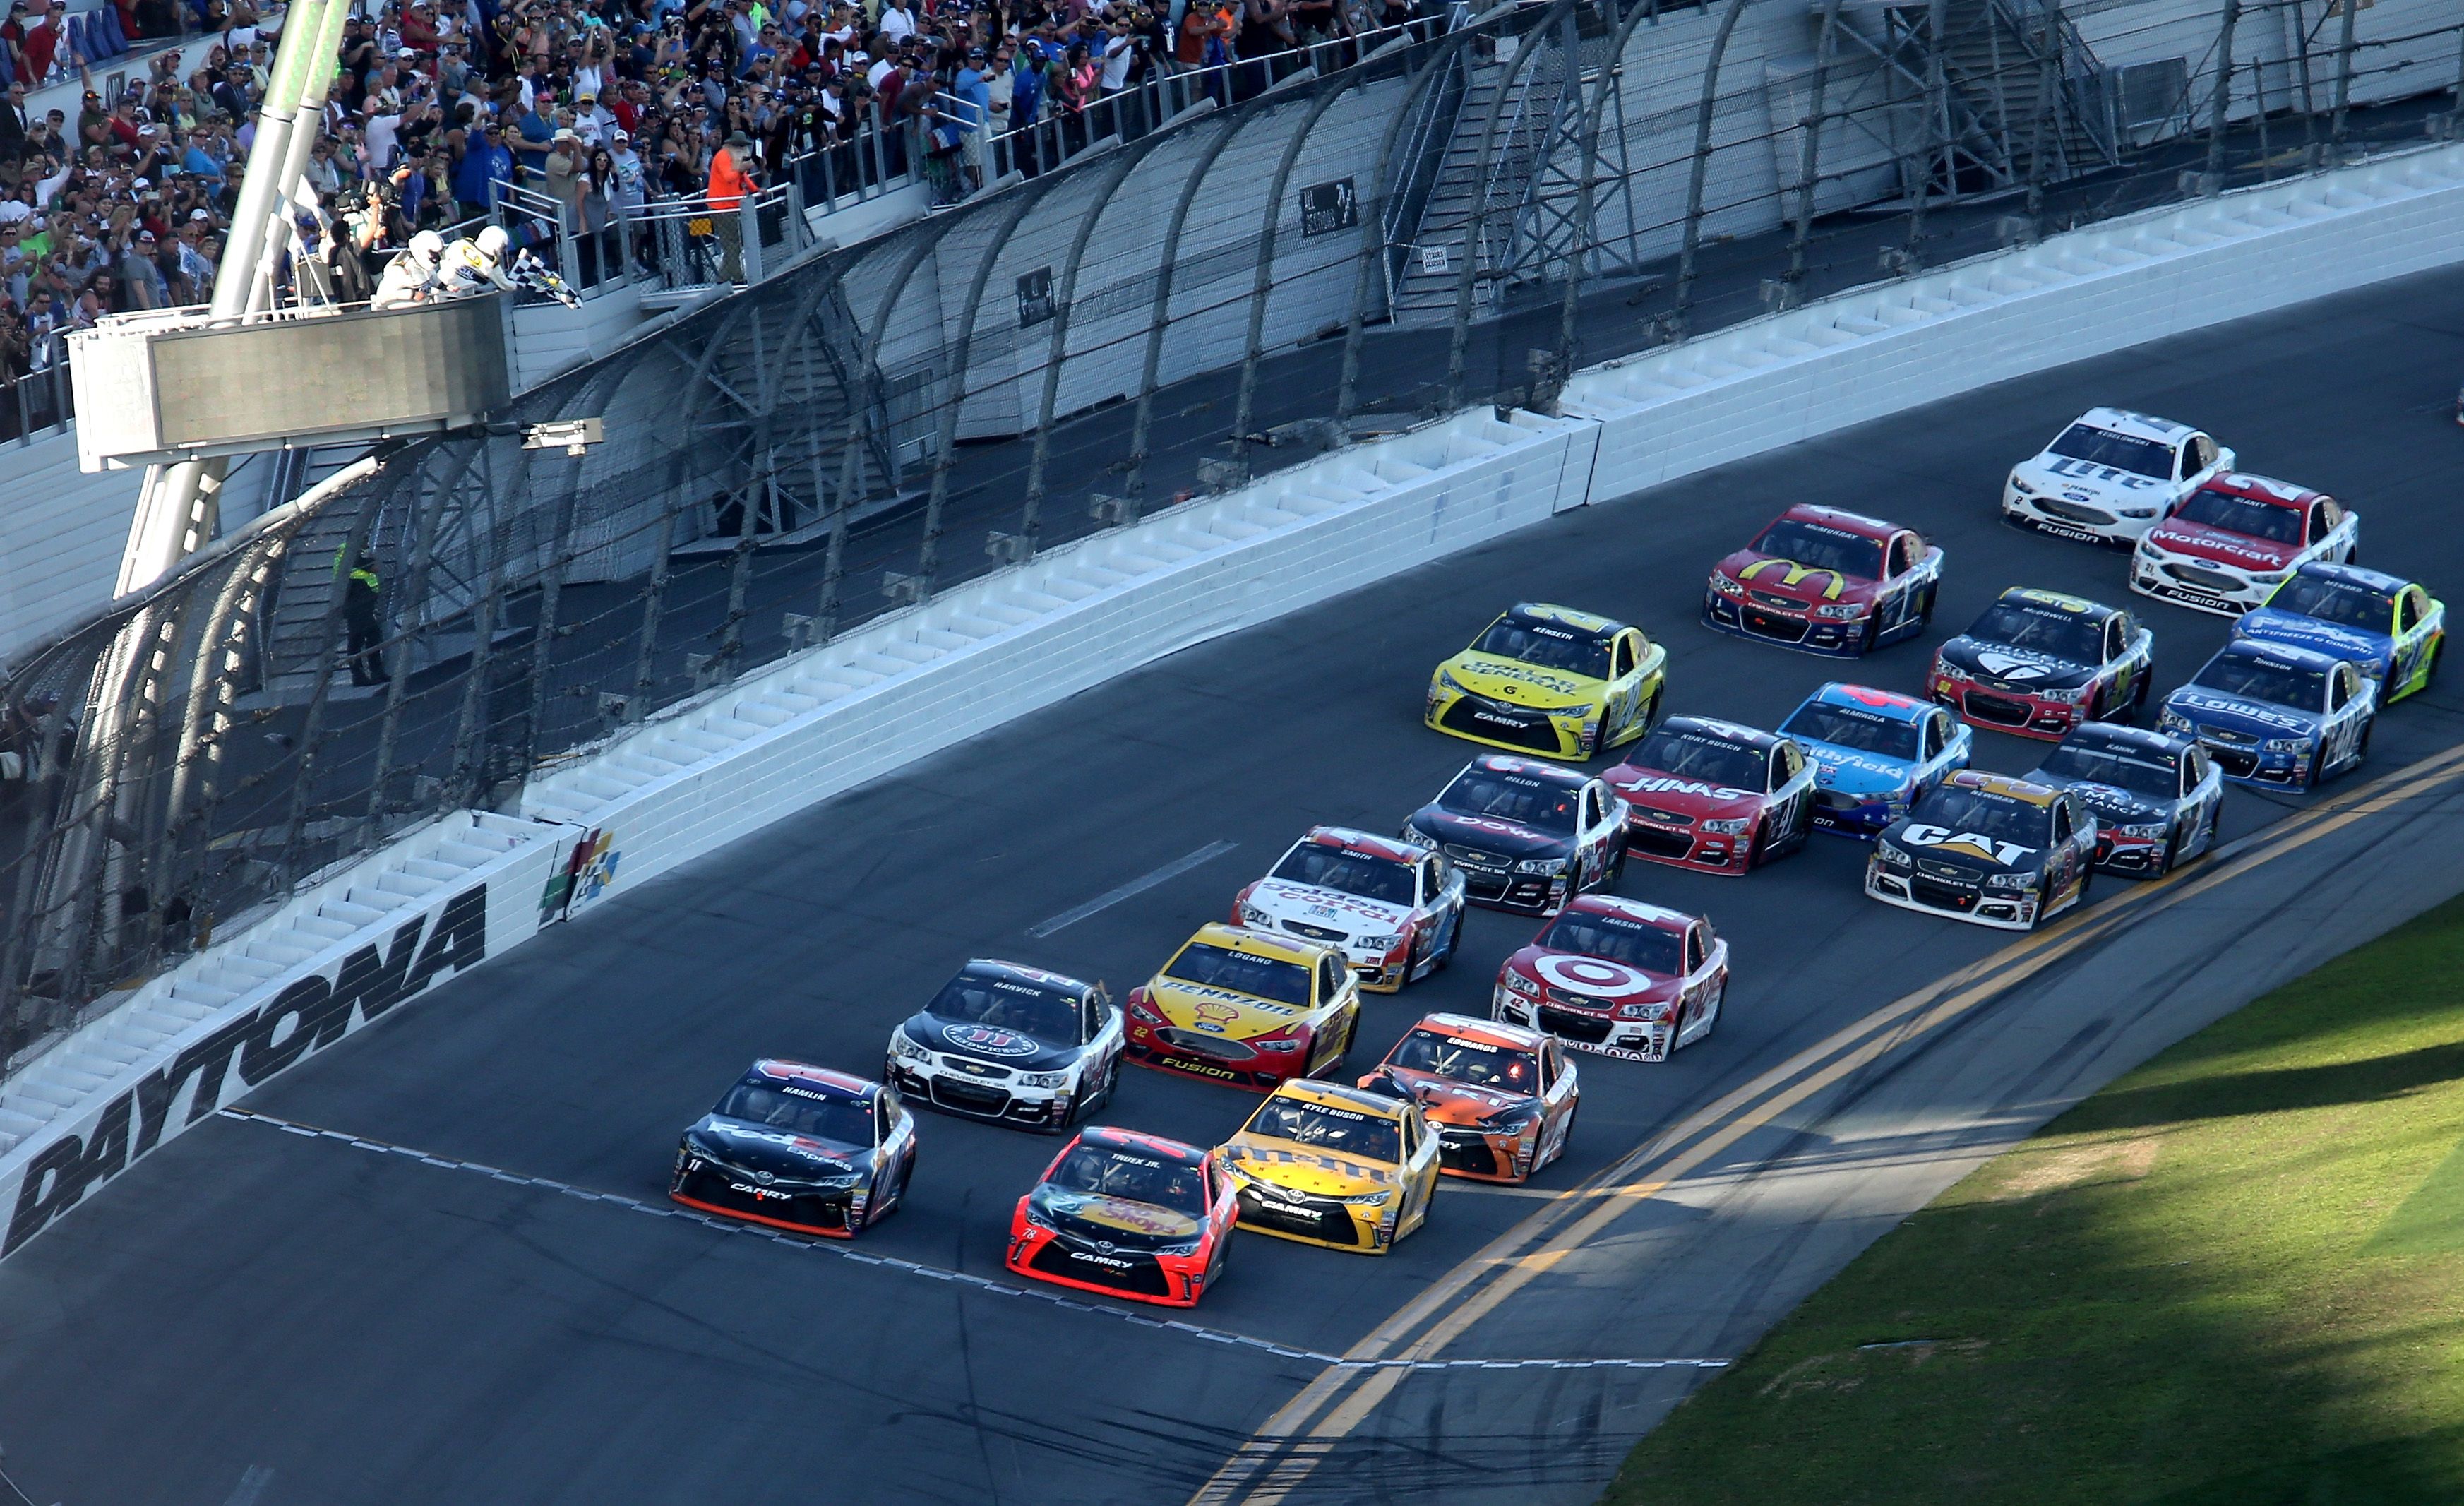 Daytona 500 live updates: Highlights, results, and news